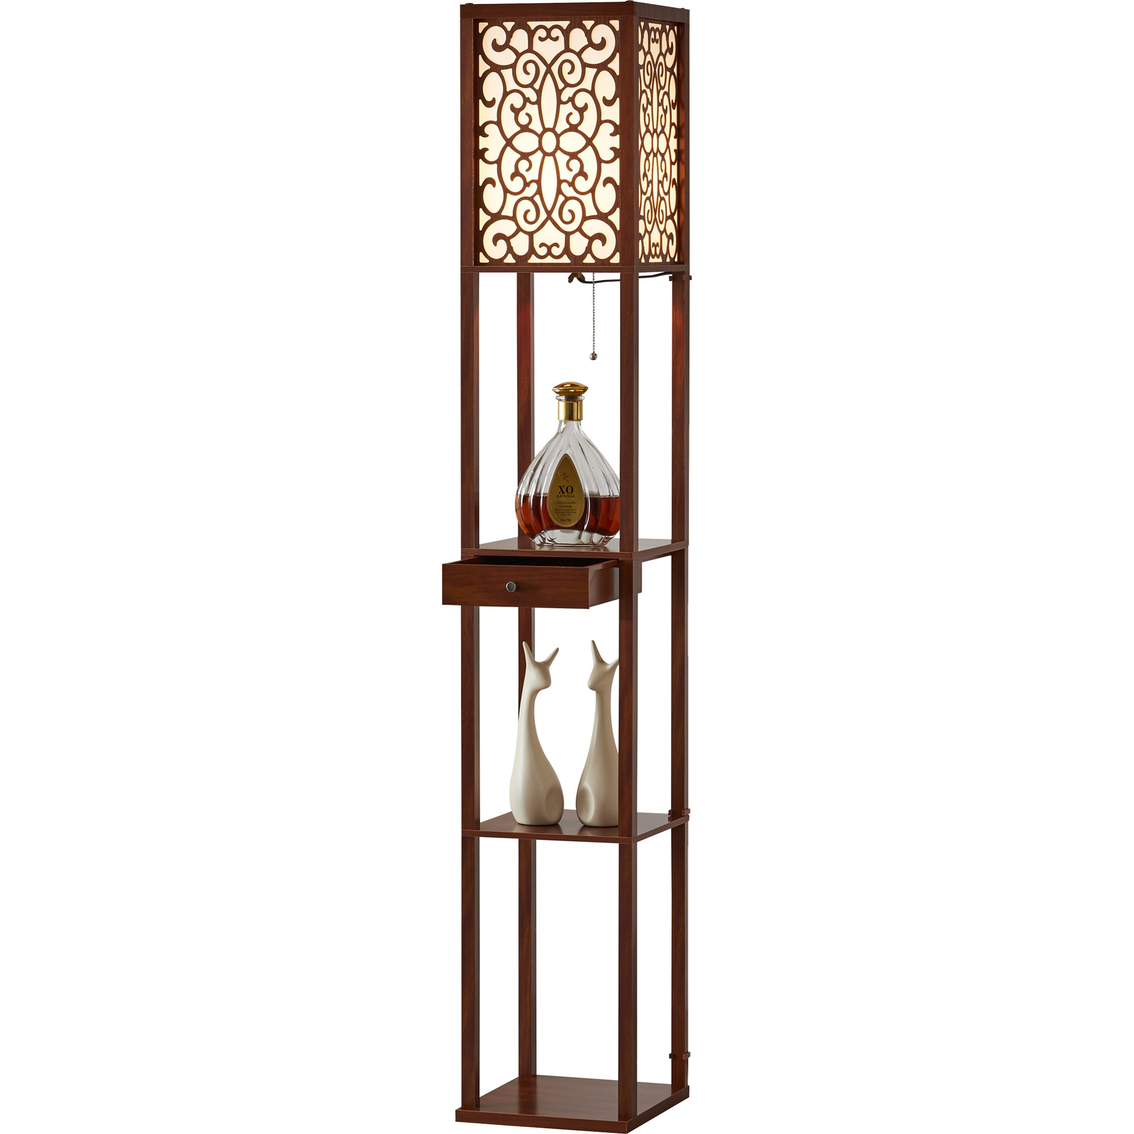 Artiva USA Etagere 63 in. Dark Walnut Shelf Floor lamp with Shade and Drawer - Image 3 of 4